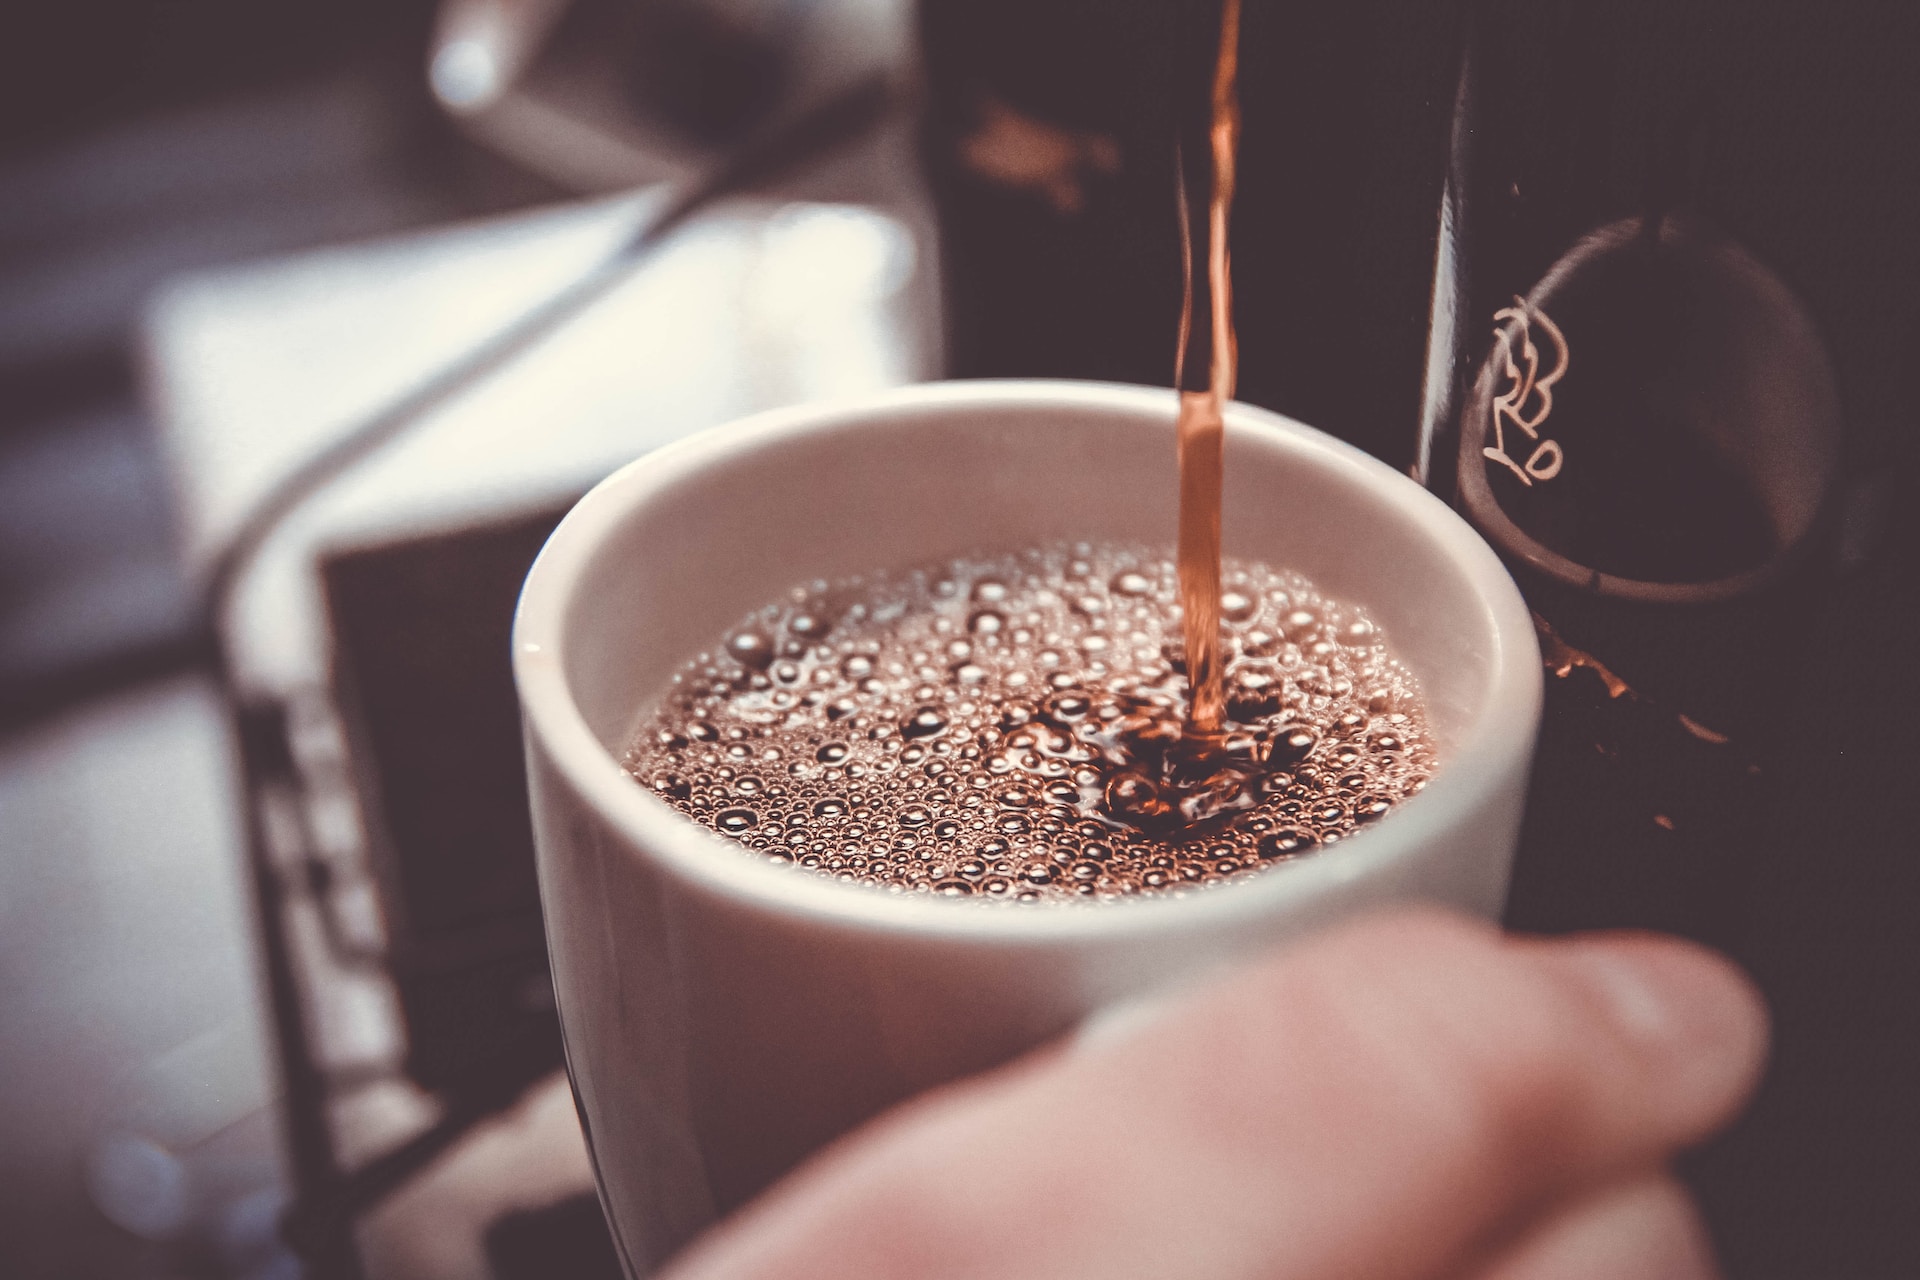 Coffee and health: 9 scientifically proven things you may not know